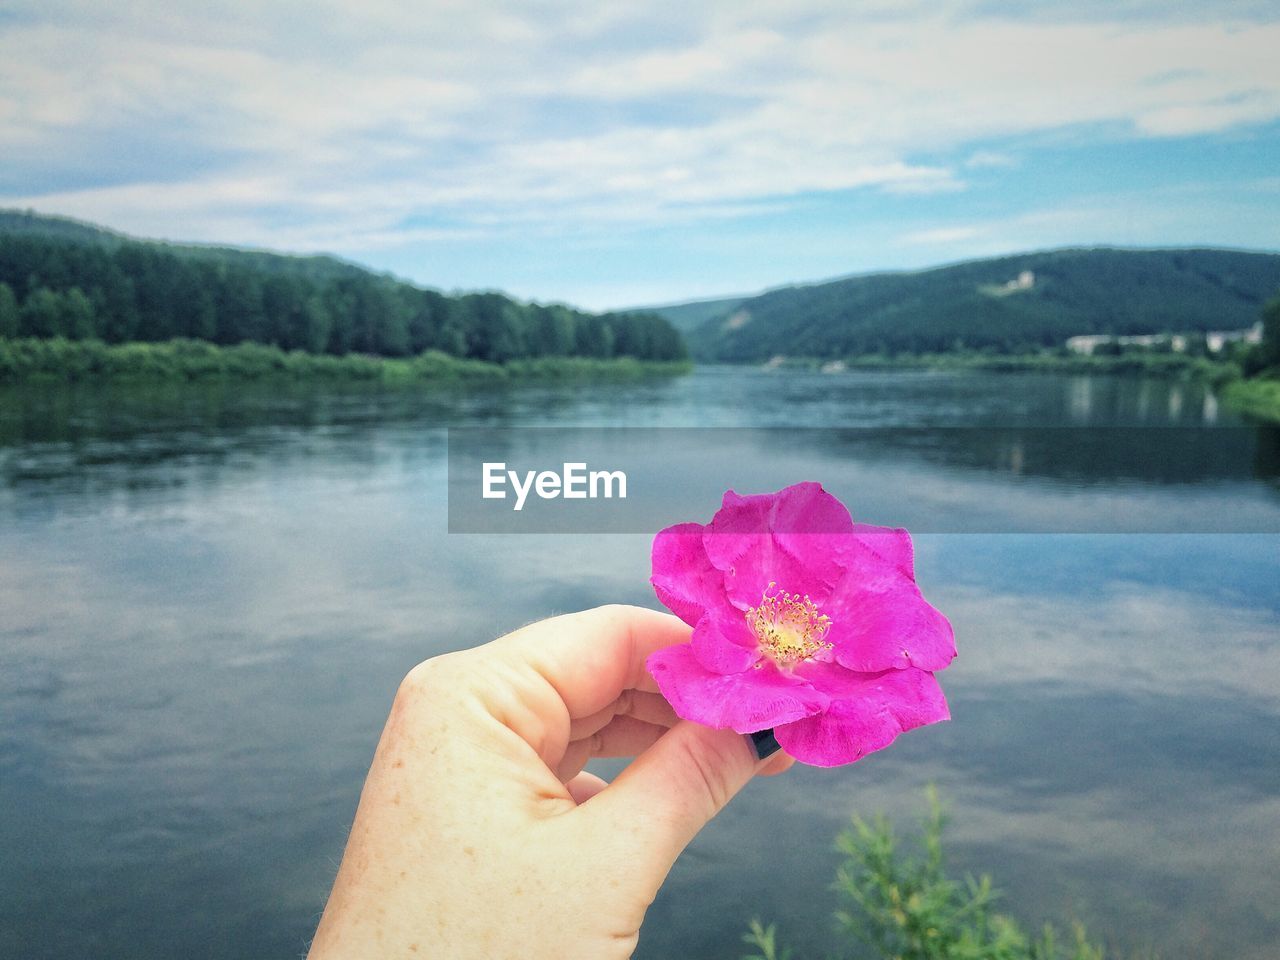 Cropped hand of woman holding pink flower over lake against cloudy sky